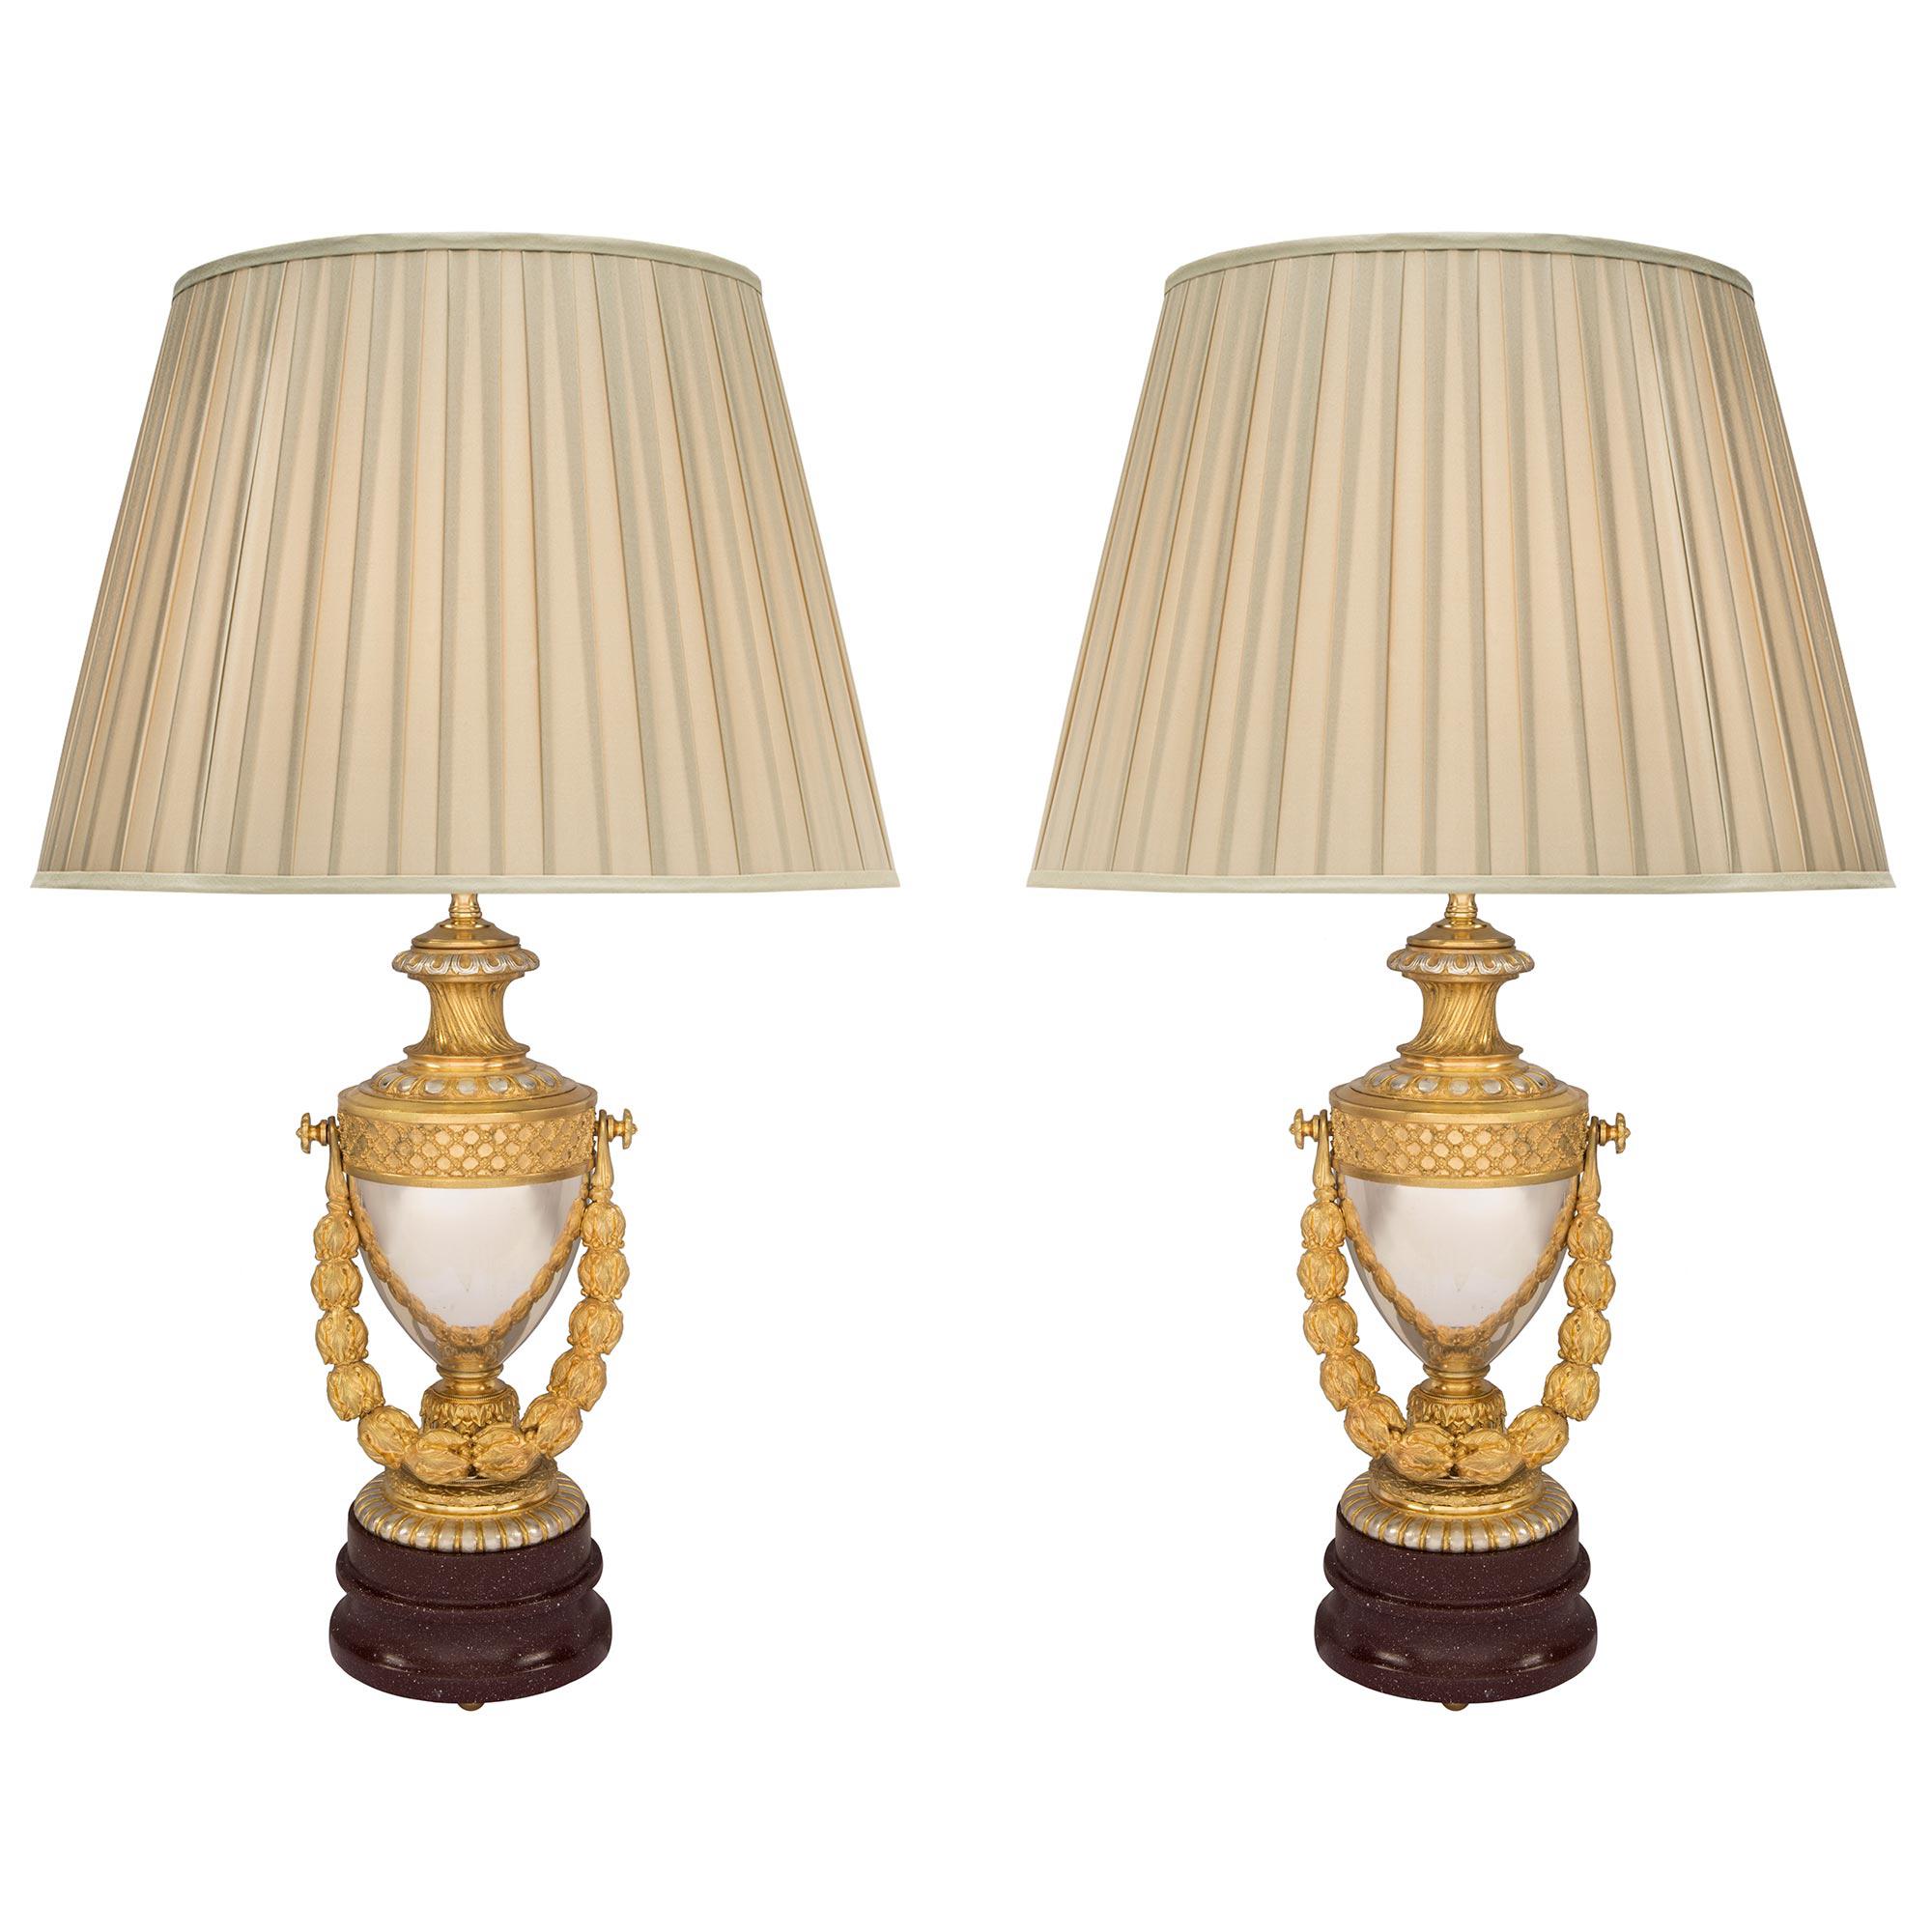 Pair of 19th Century Louis XVI Style Ormolu, Bronze and Faux Marble Lamps For Sale